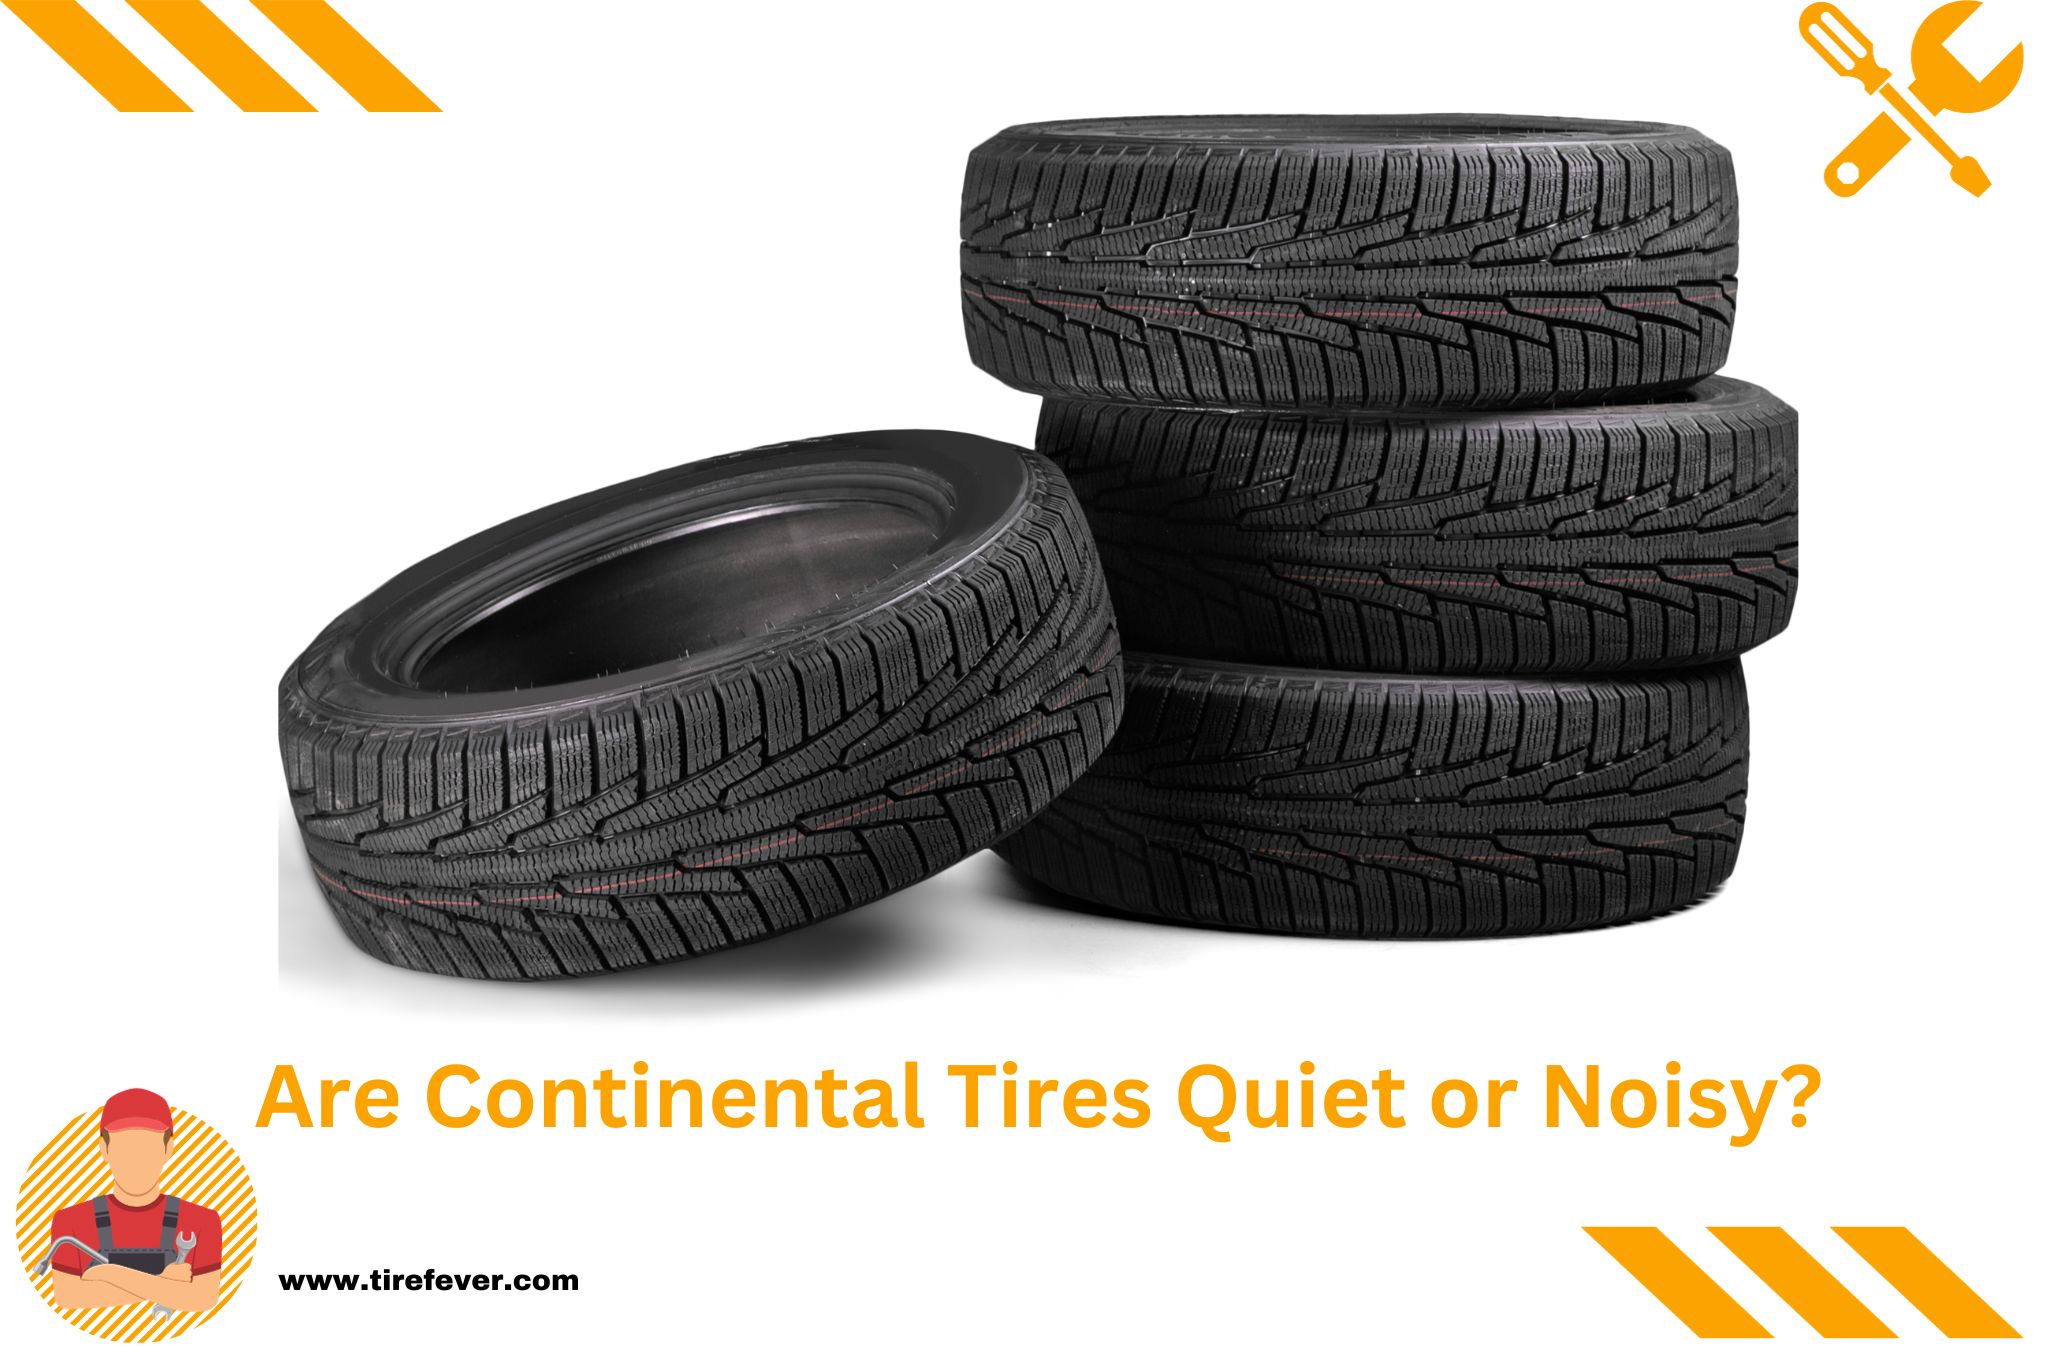 Are Continental Tires Quiet or Noisy?